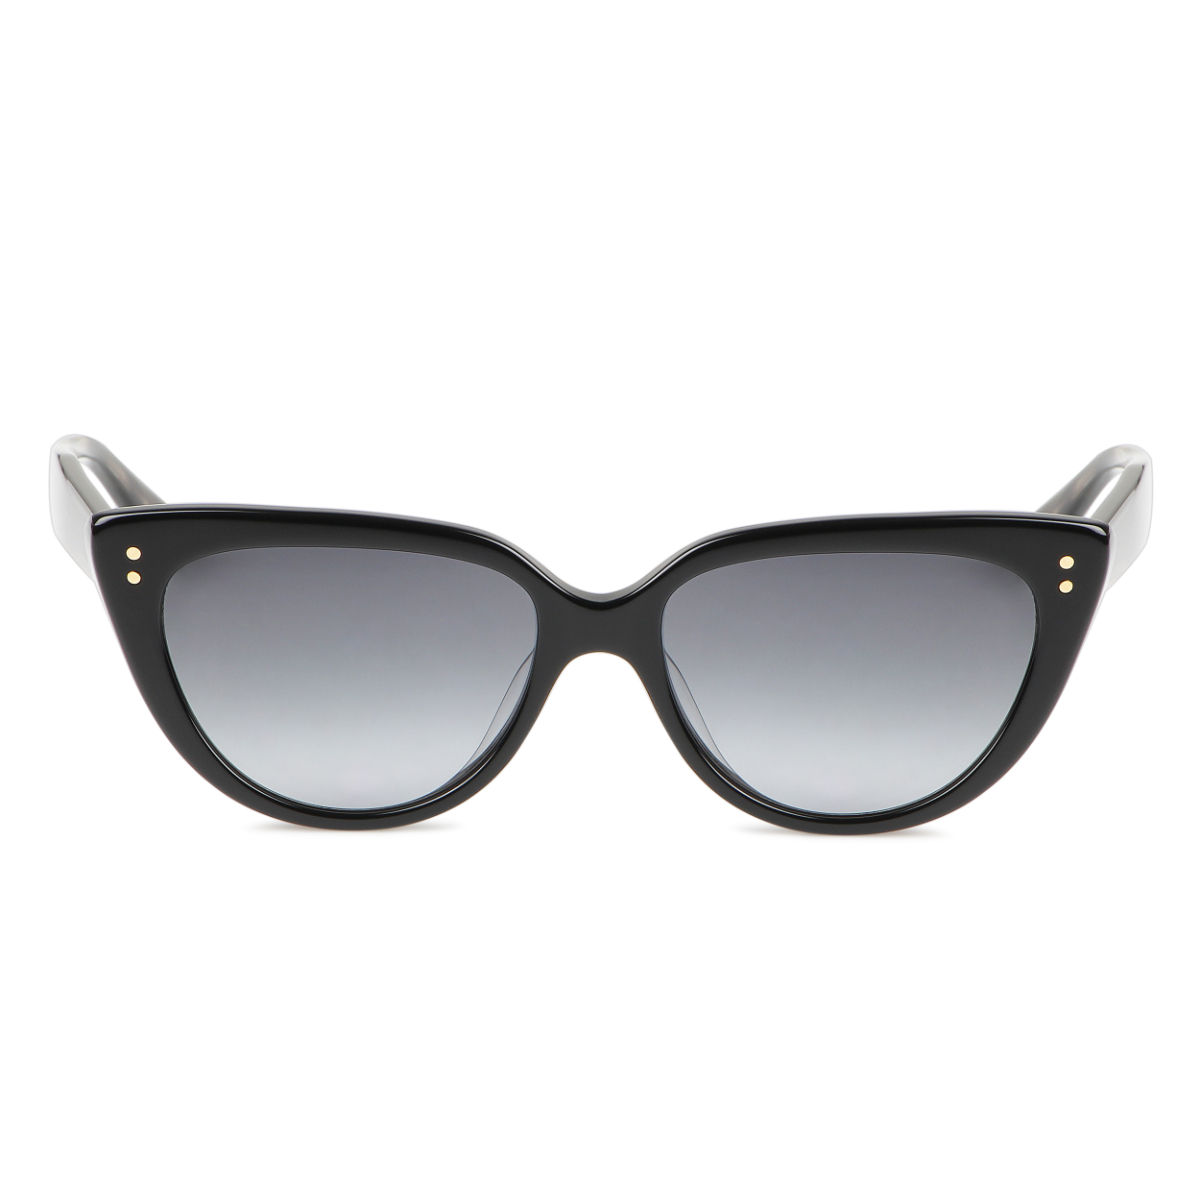 Kate Spade ALIJAH/G/S 807 53 9O Woman Cat-Eye Sunglass: Buy Kate Spade  ALIJAH/G/S 807 53 9O Woman Cat-Eye Sunglass Online at Best Price in India |  Nykaa